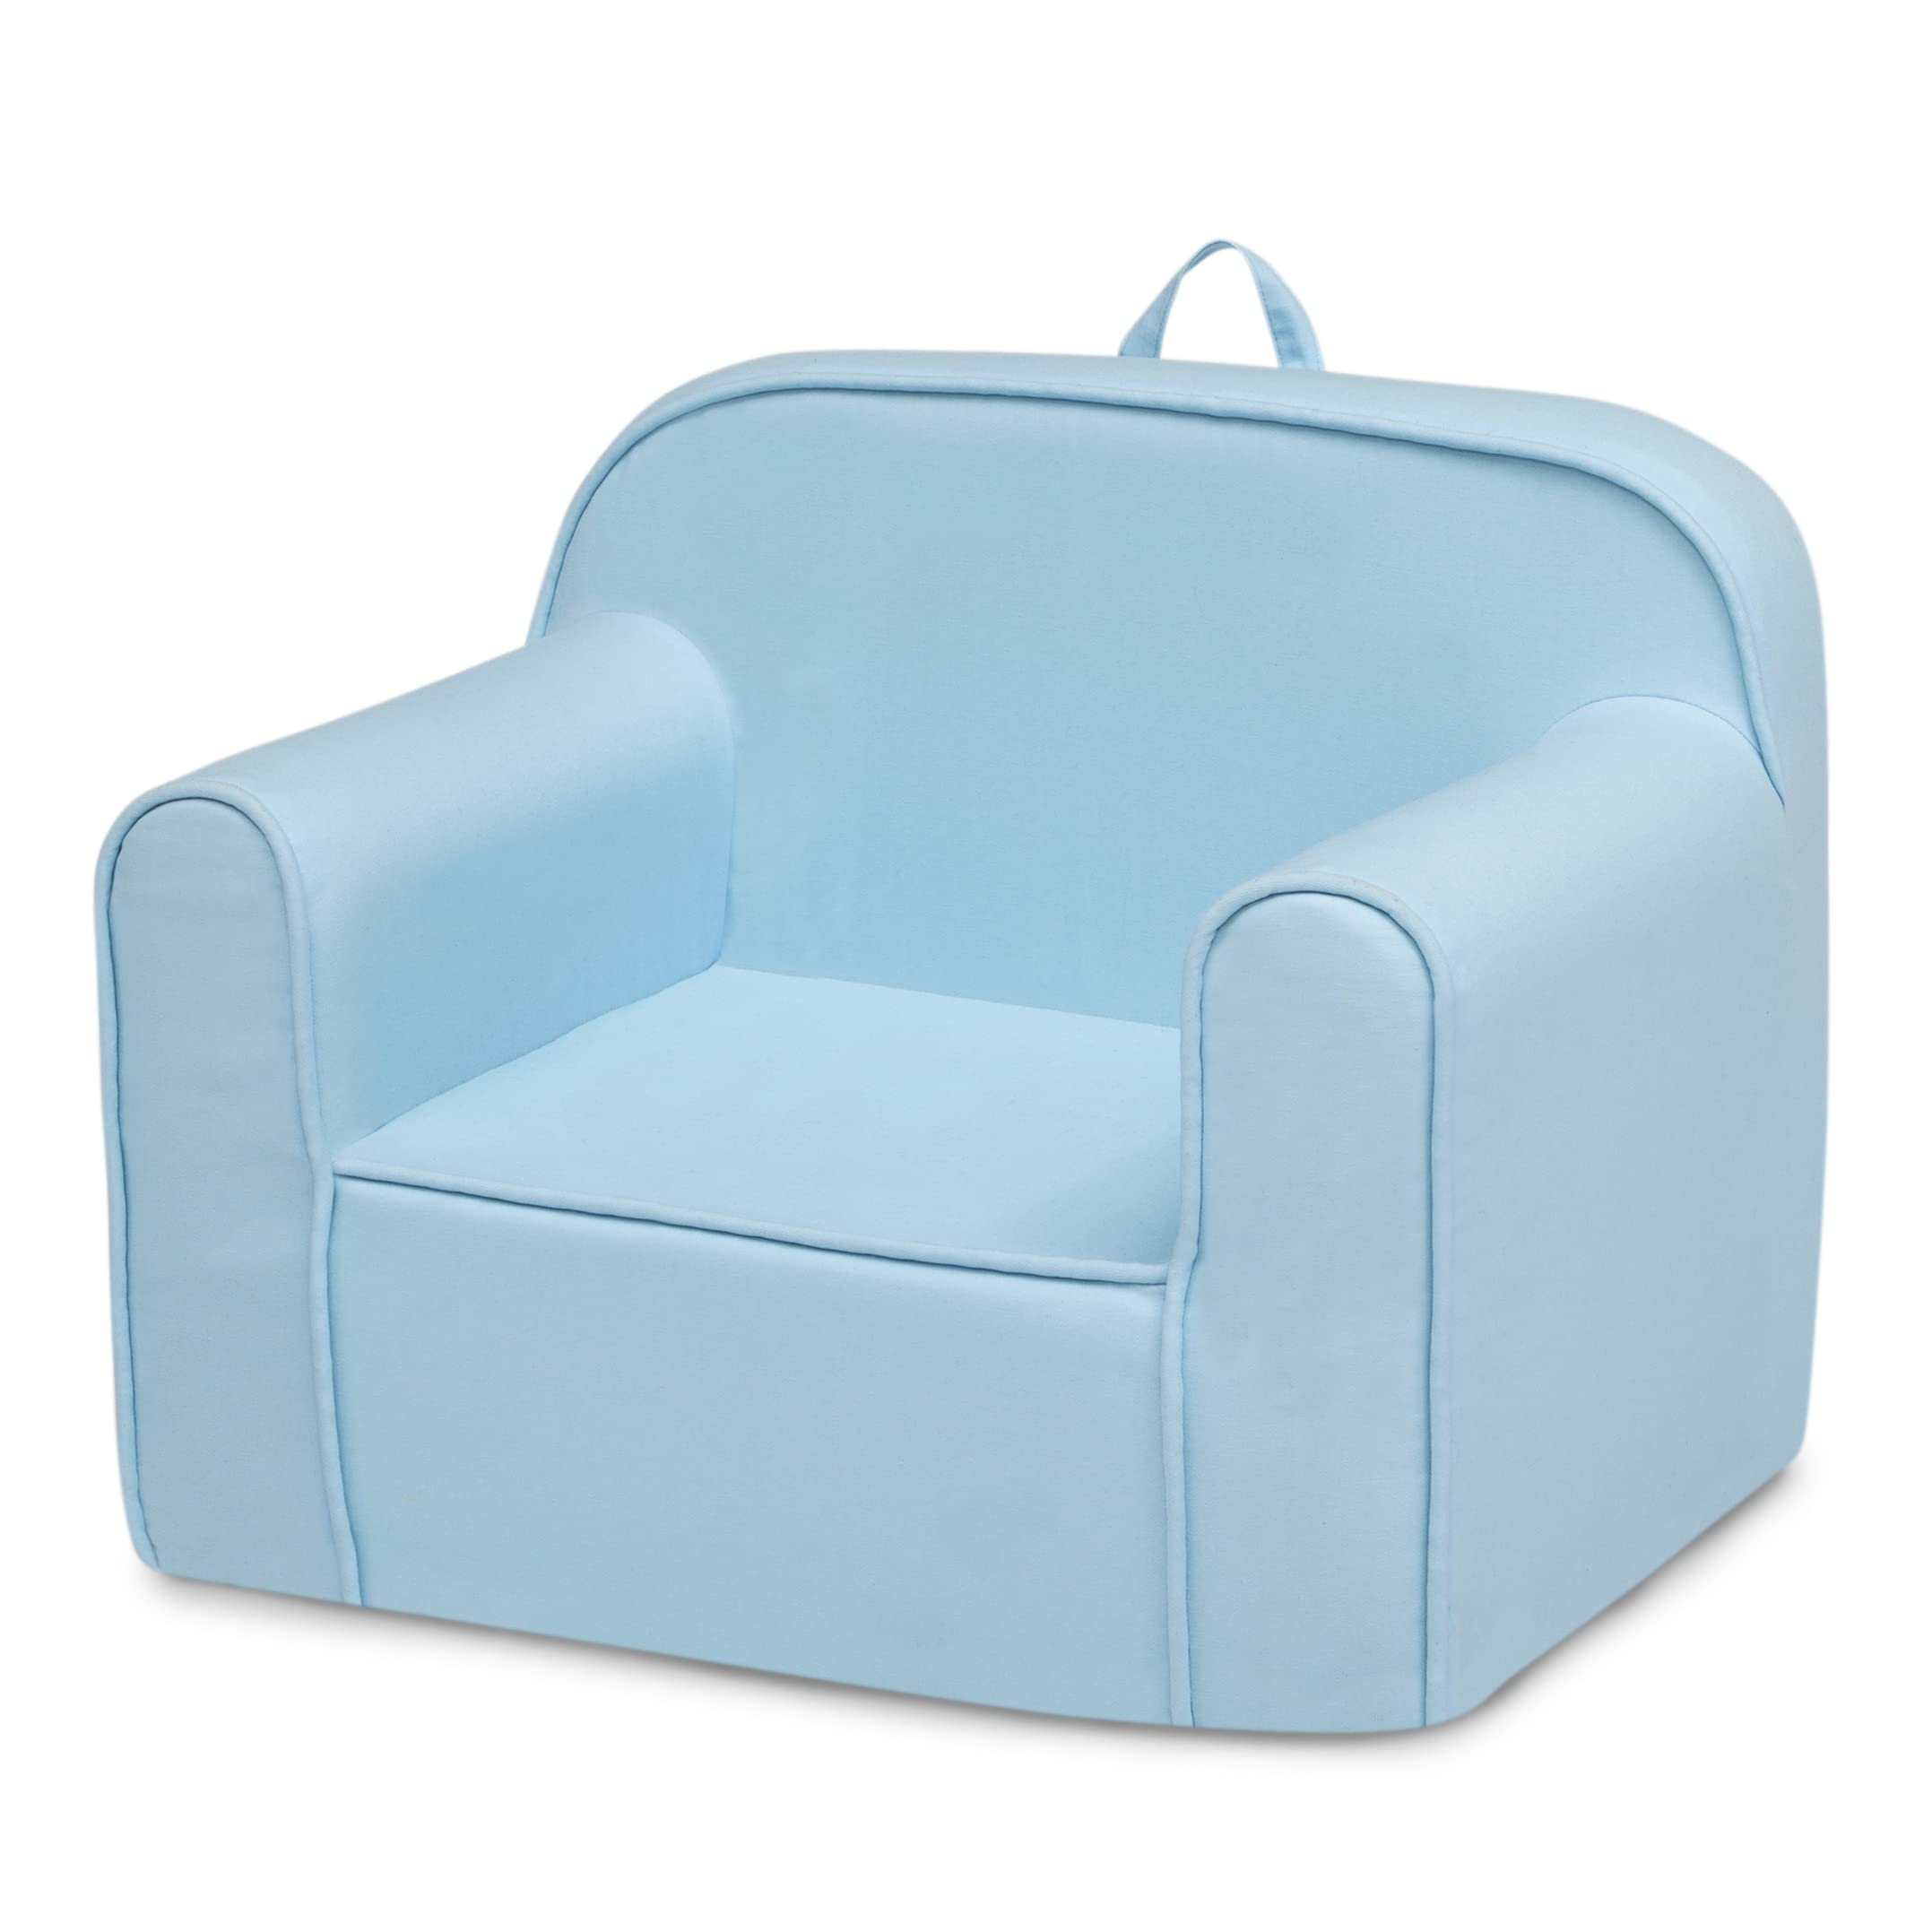 Delta Children Cozee Chair for Kids for Ages 18 Months and Up, Light Blue